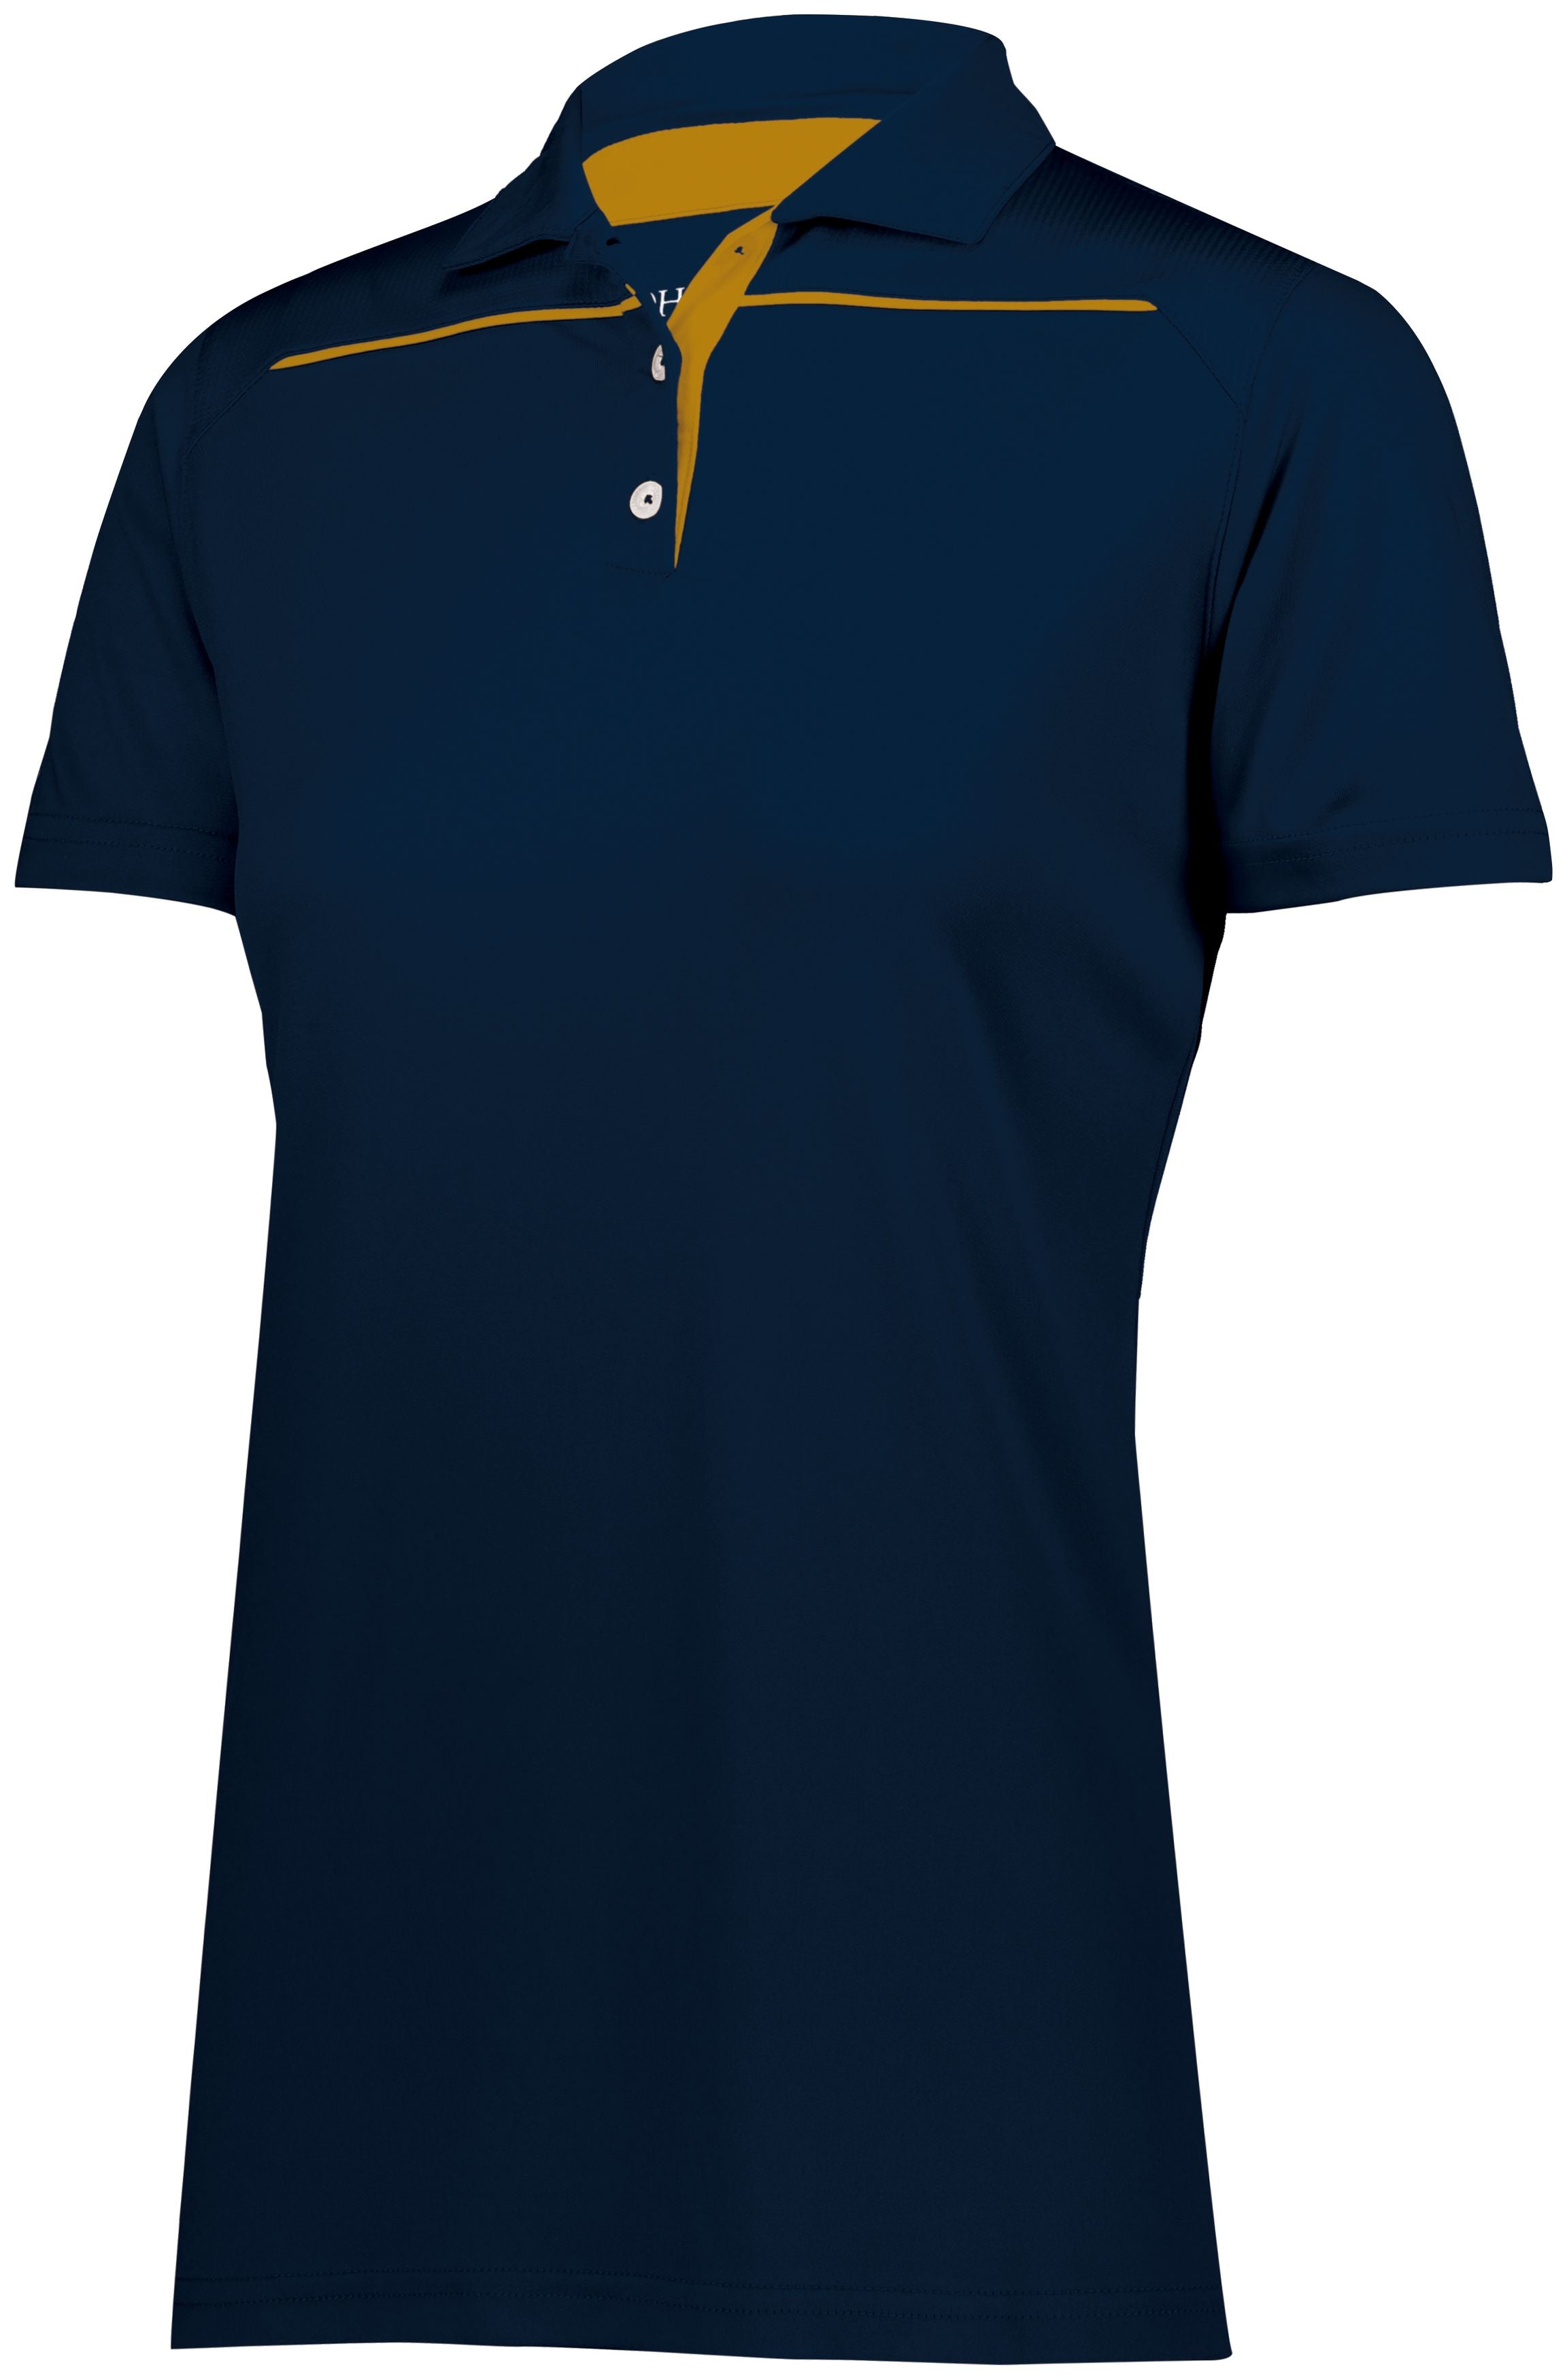 Holloway Ladies Defer Polo in Navy/Gold  -Part of the Ladies, Ladies-Polo, Polos, Holloway, Shirts product lines at KanaleyCreations.com